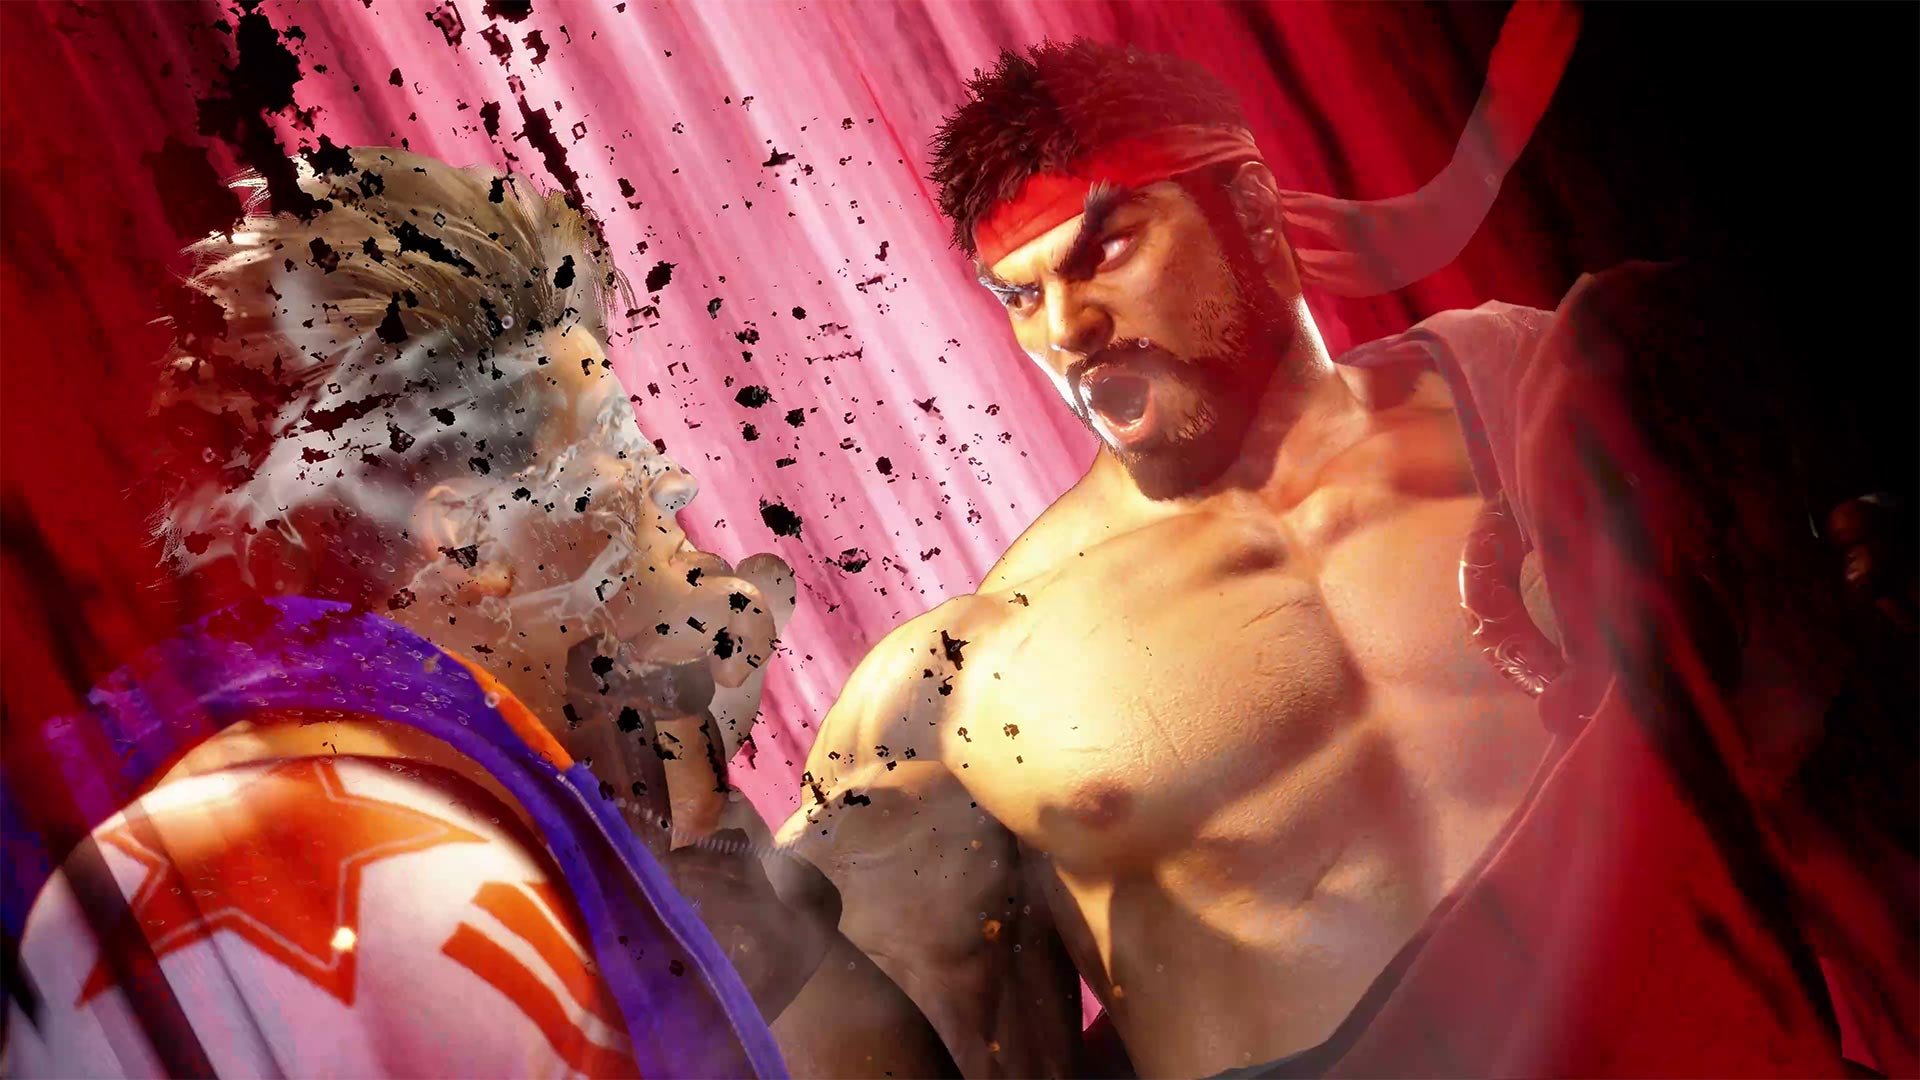 Ryu - All Victory Quotes (Arcade Mode) / Street Fighter 4 